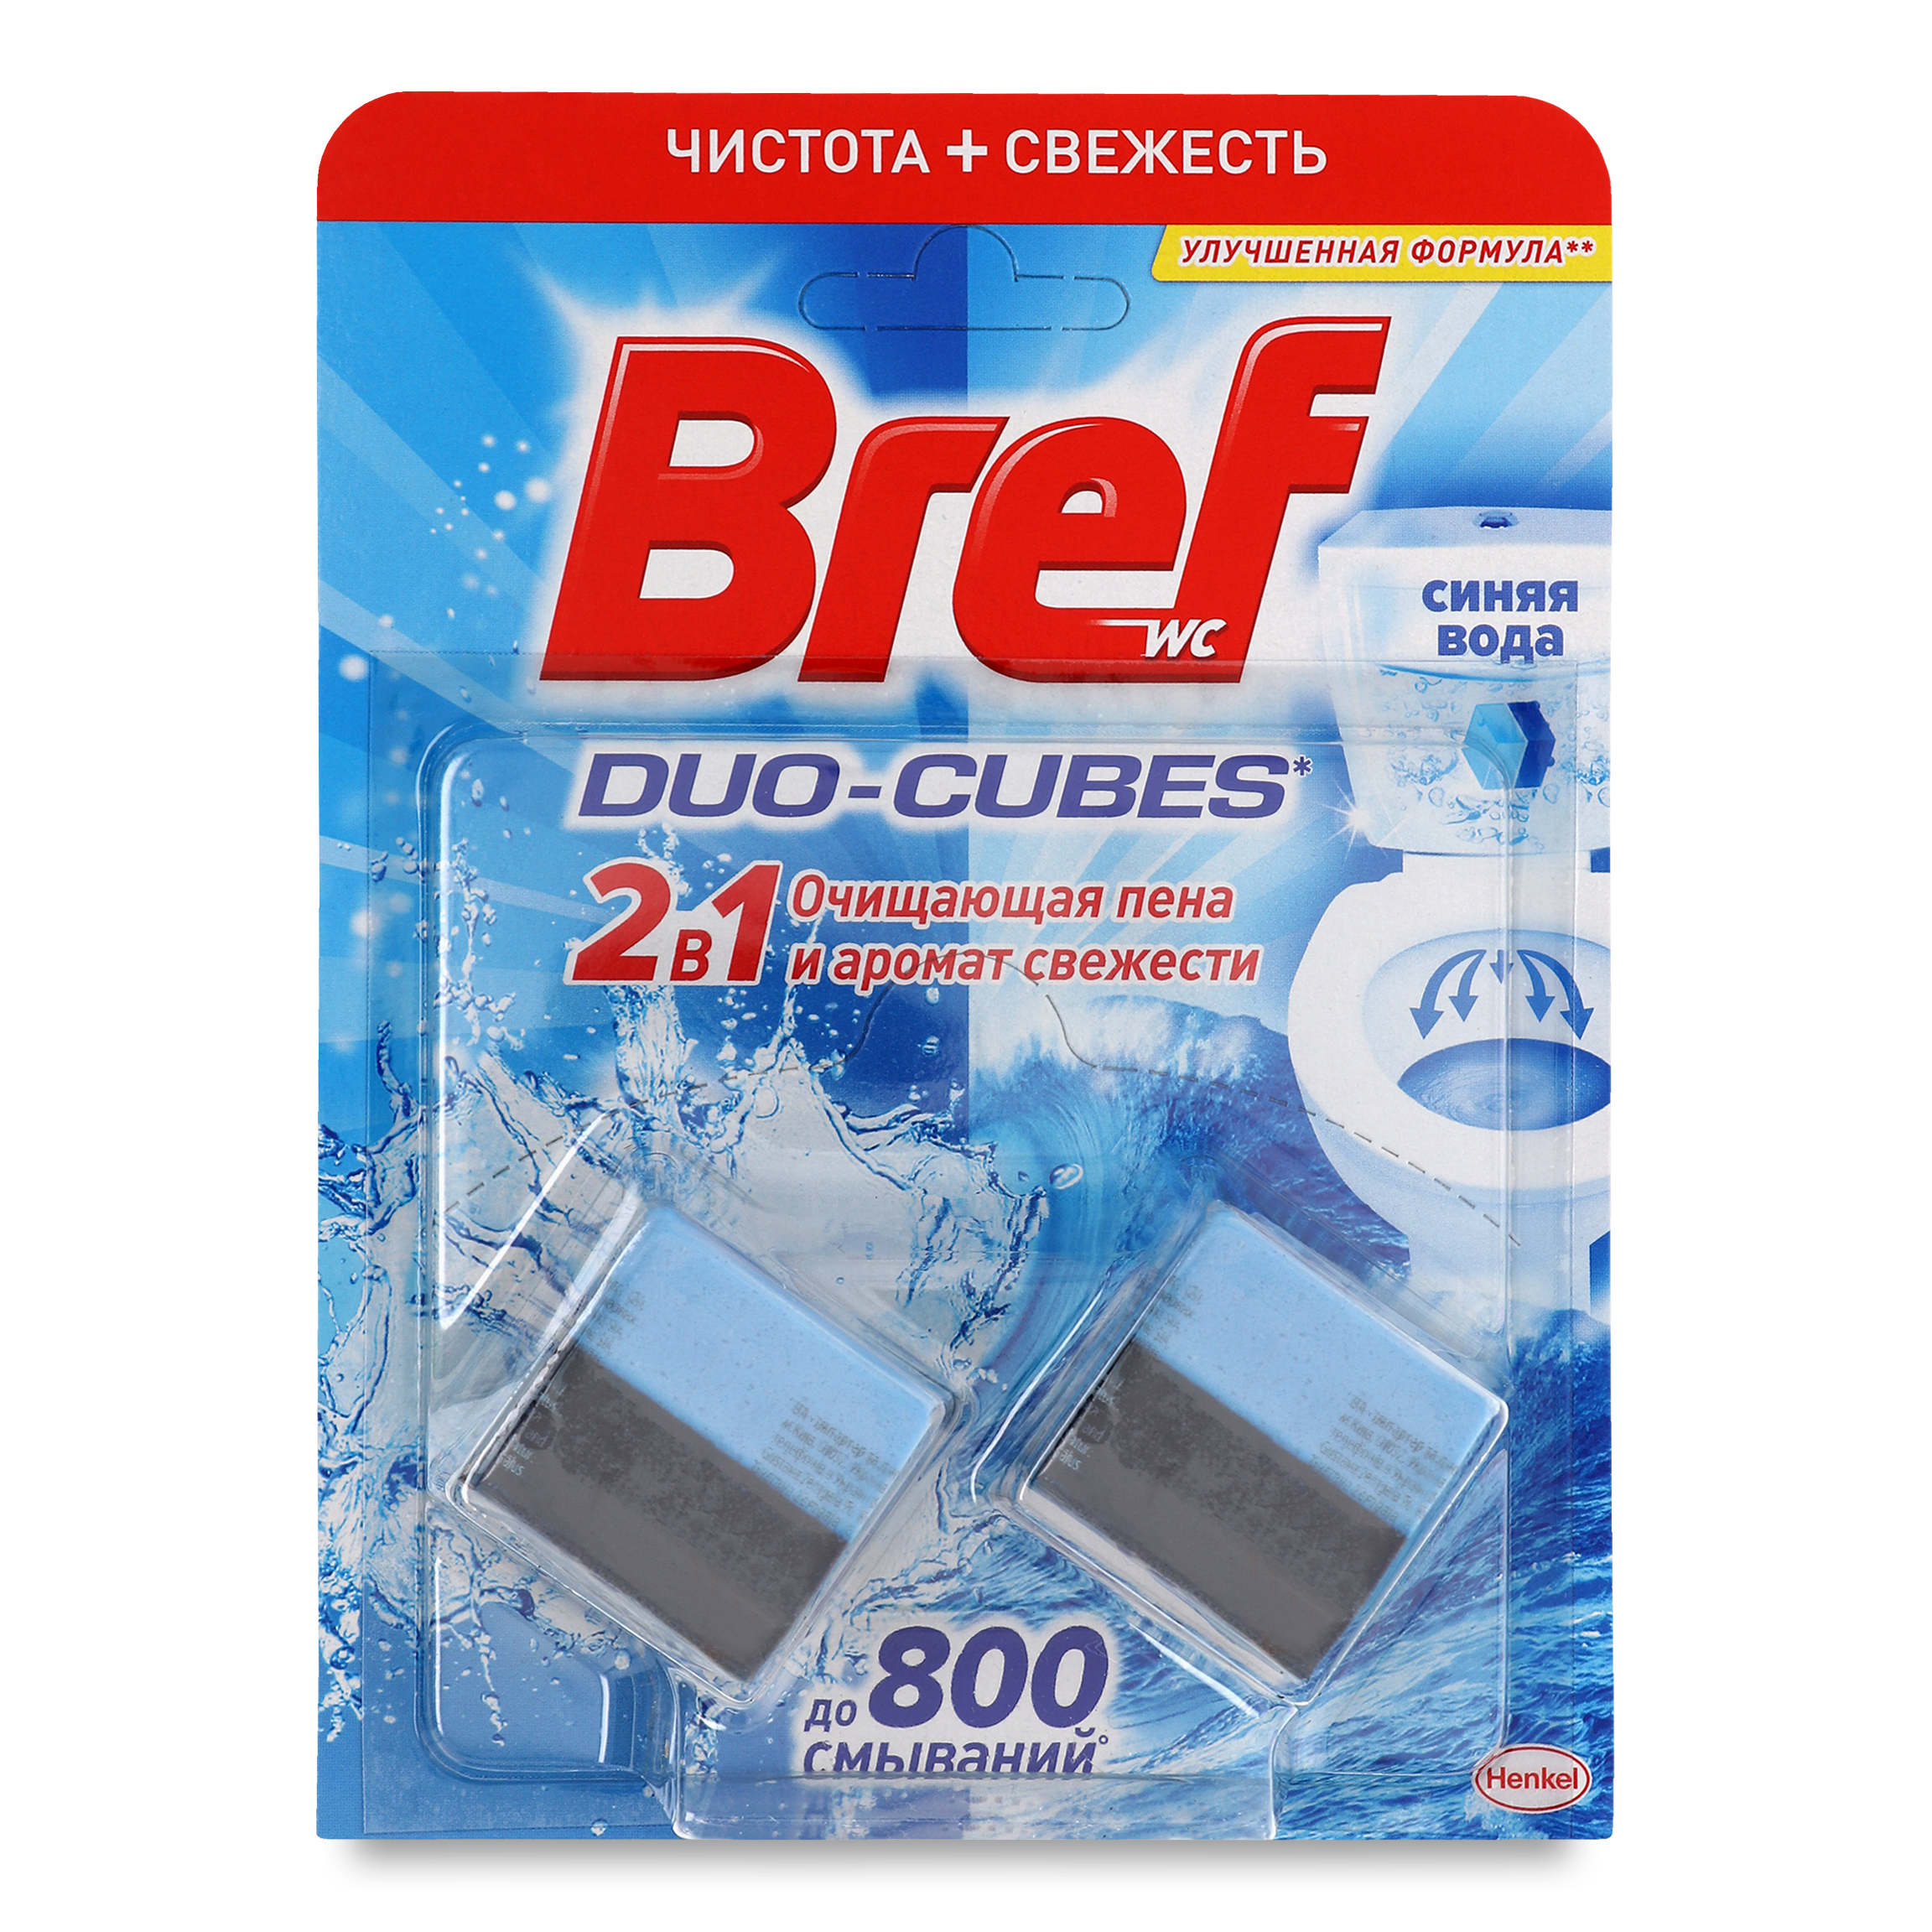 Bref Duo-Cubes for Cistern 2x50g